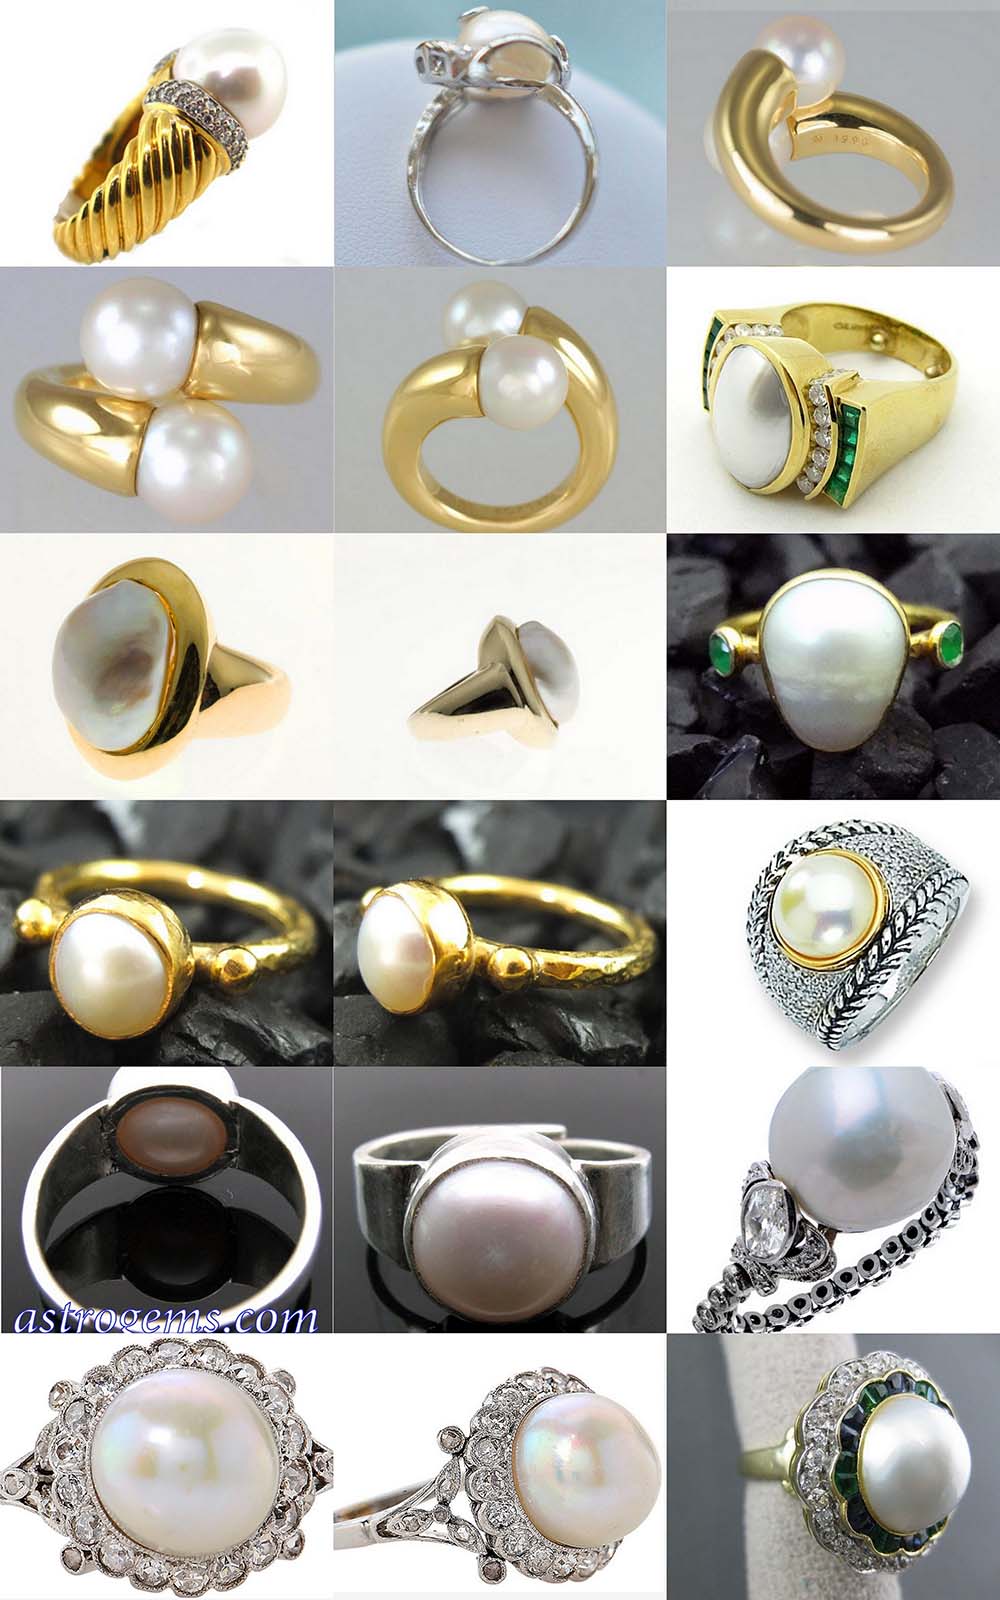 Astrogems can make astrological pearl rings in any style.